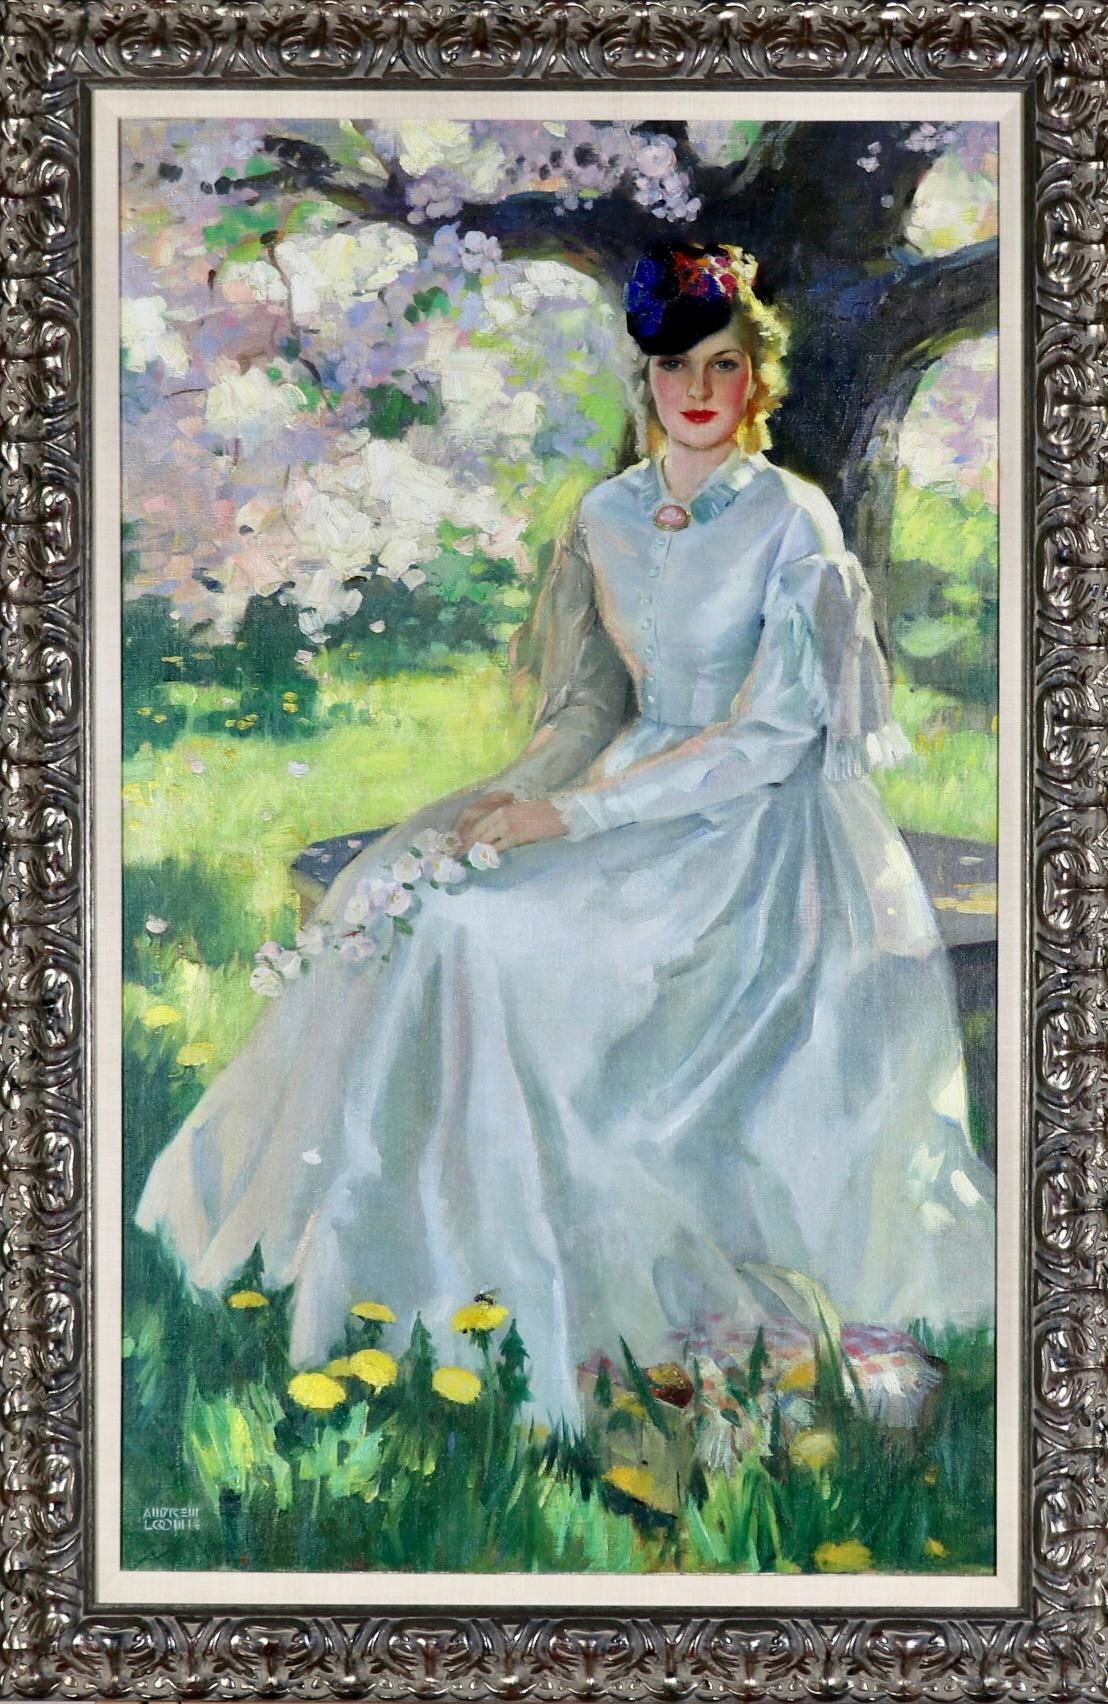 Woman Under the Blooming Tree - Painting by Andrew Loomis